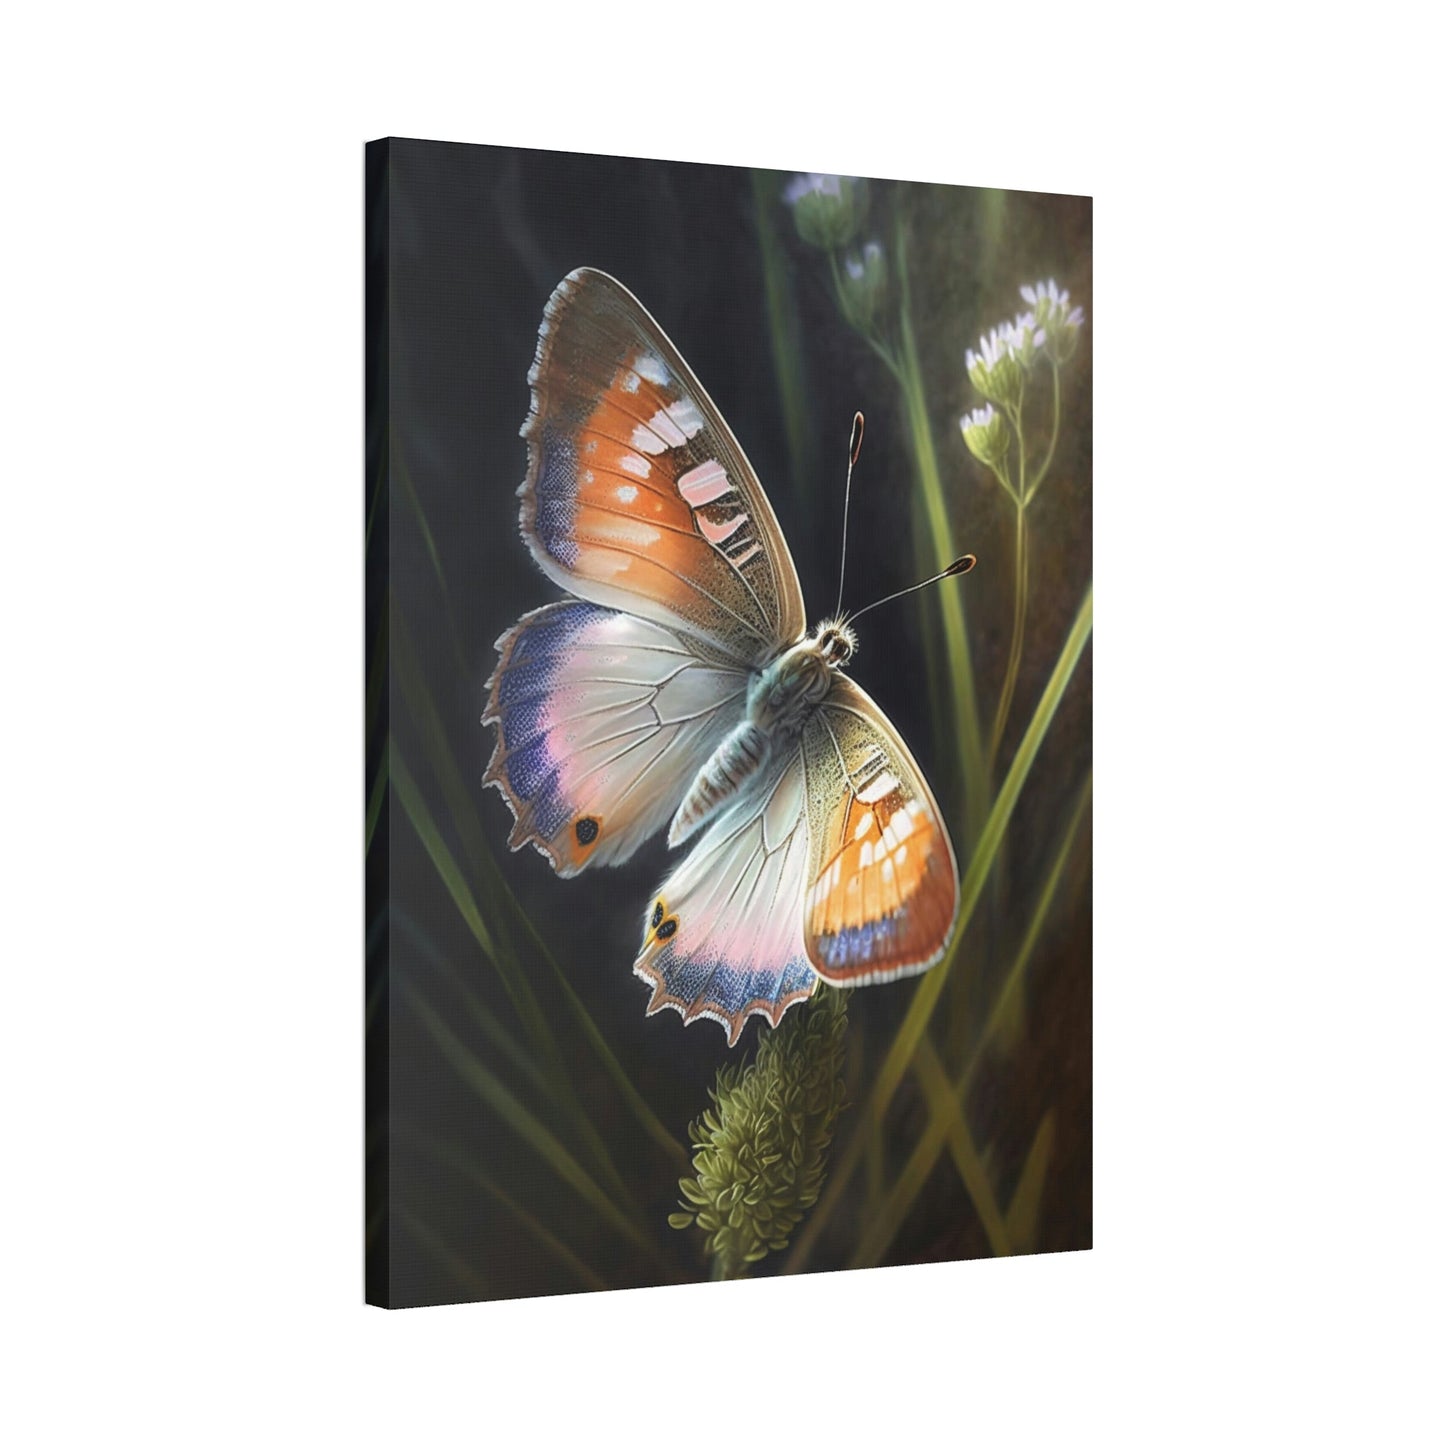 Butterfly's Solitude: Framed Poster & Canvas Print of One Insect in Tranquility